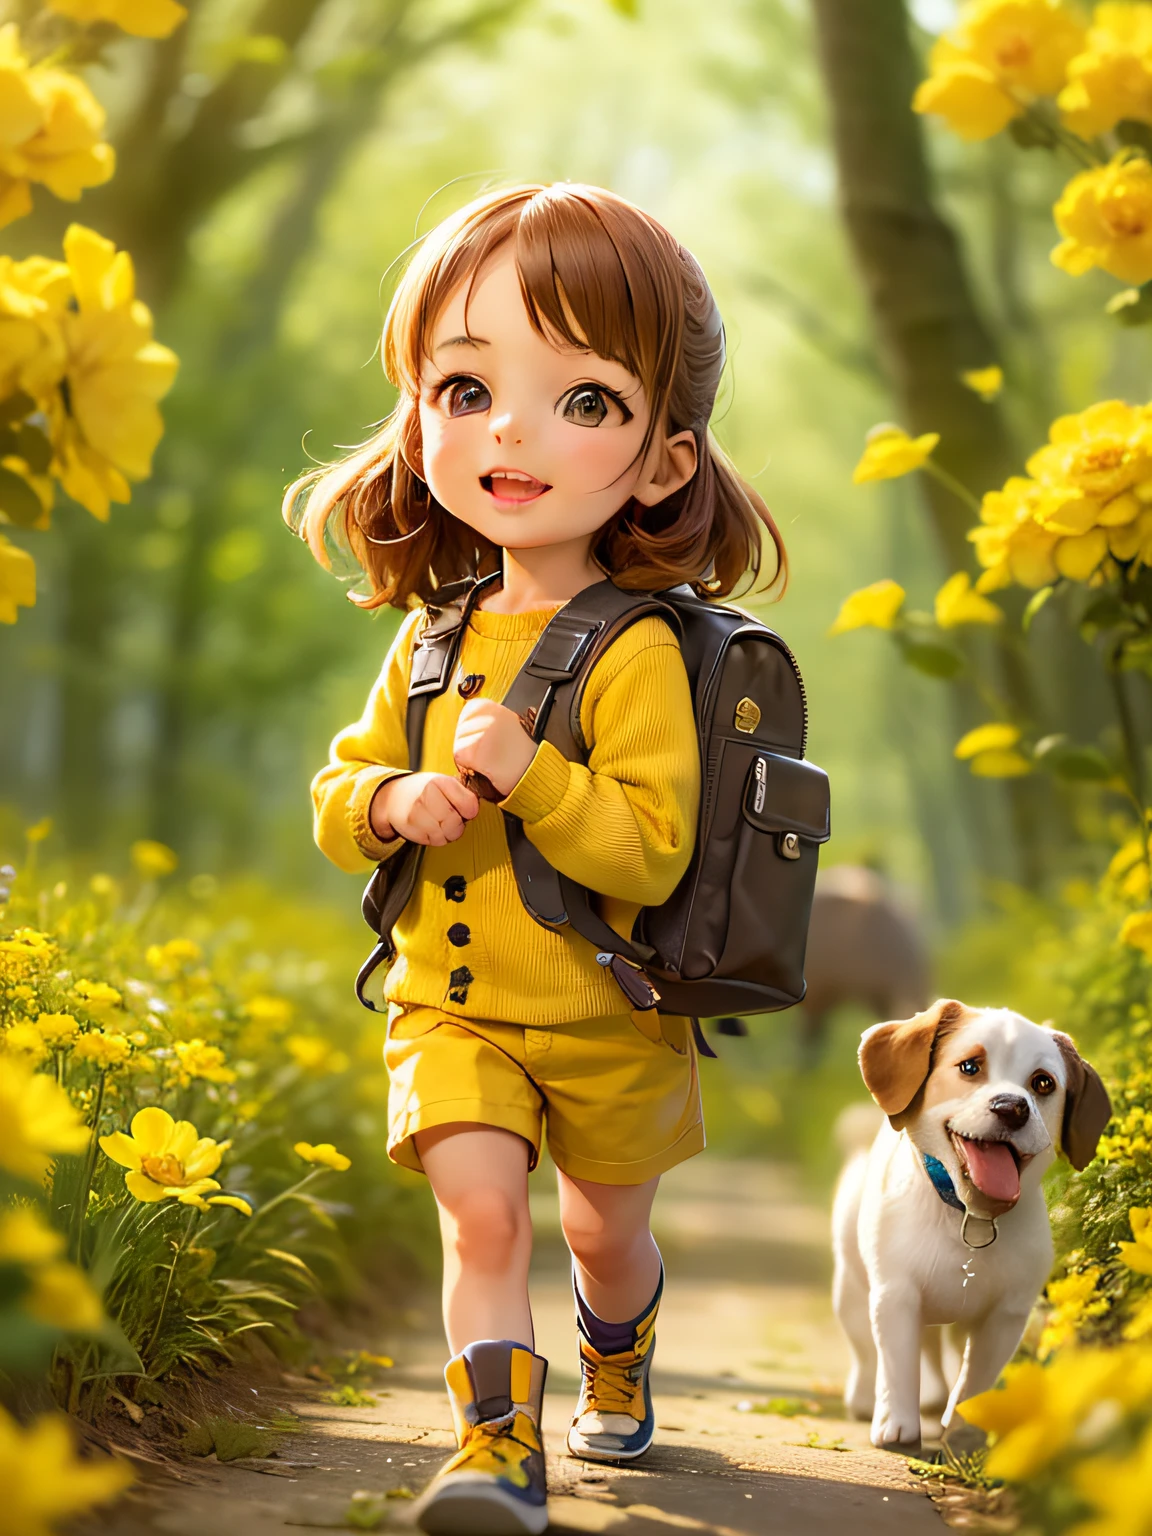 A very adorable  with a backpack and her cute puppy enjoying a beautiful spring walk surrounded by beautiful yellow flowers and nature. The illustration is a high-definition illustration in 4K resolution with very detailed facial features and cartoon-style visuals.